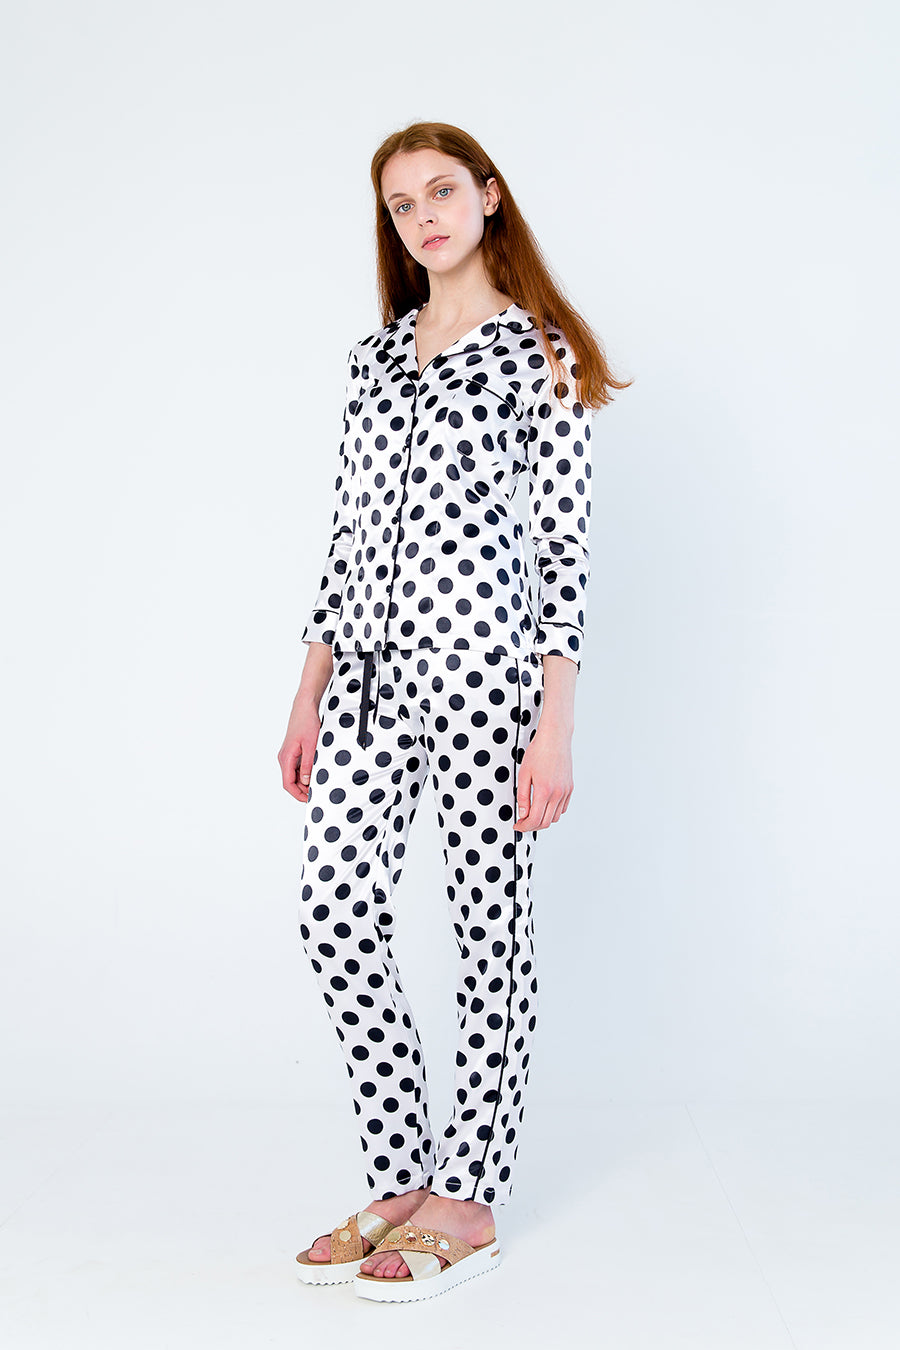 Dotted pajama - White front view